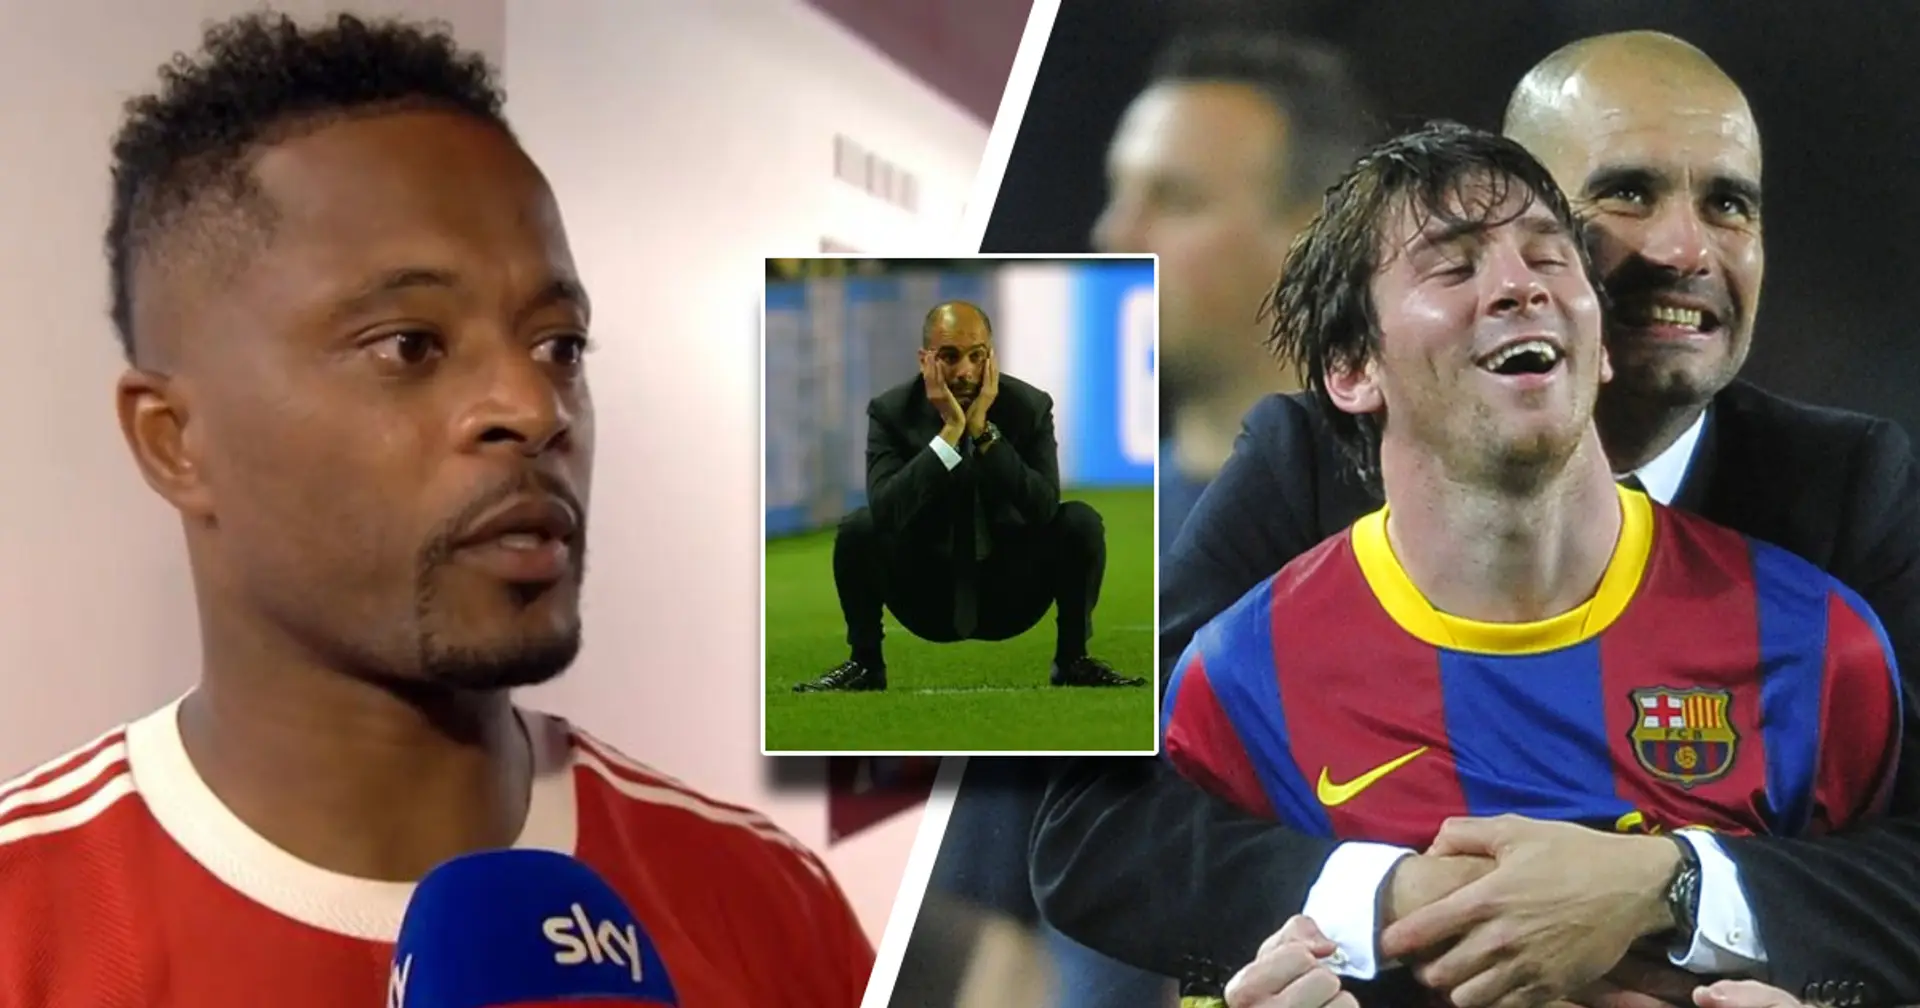 'He won Champions League because he had Messi': Patrice Evra's brutal response to Pep Guardiola jibe